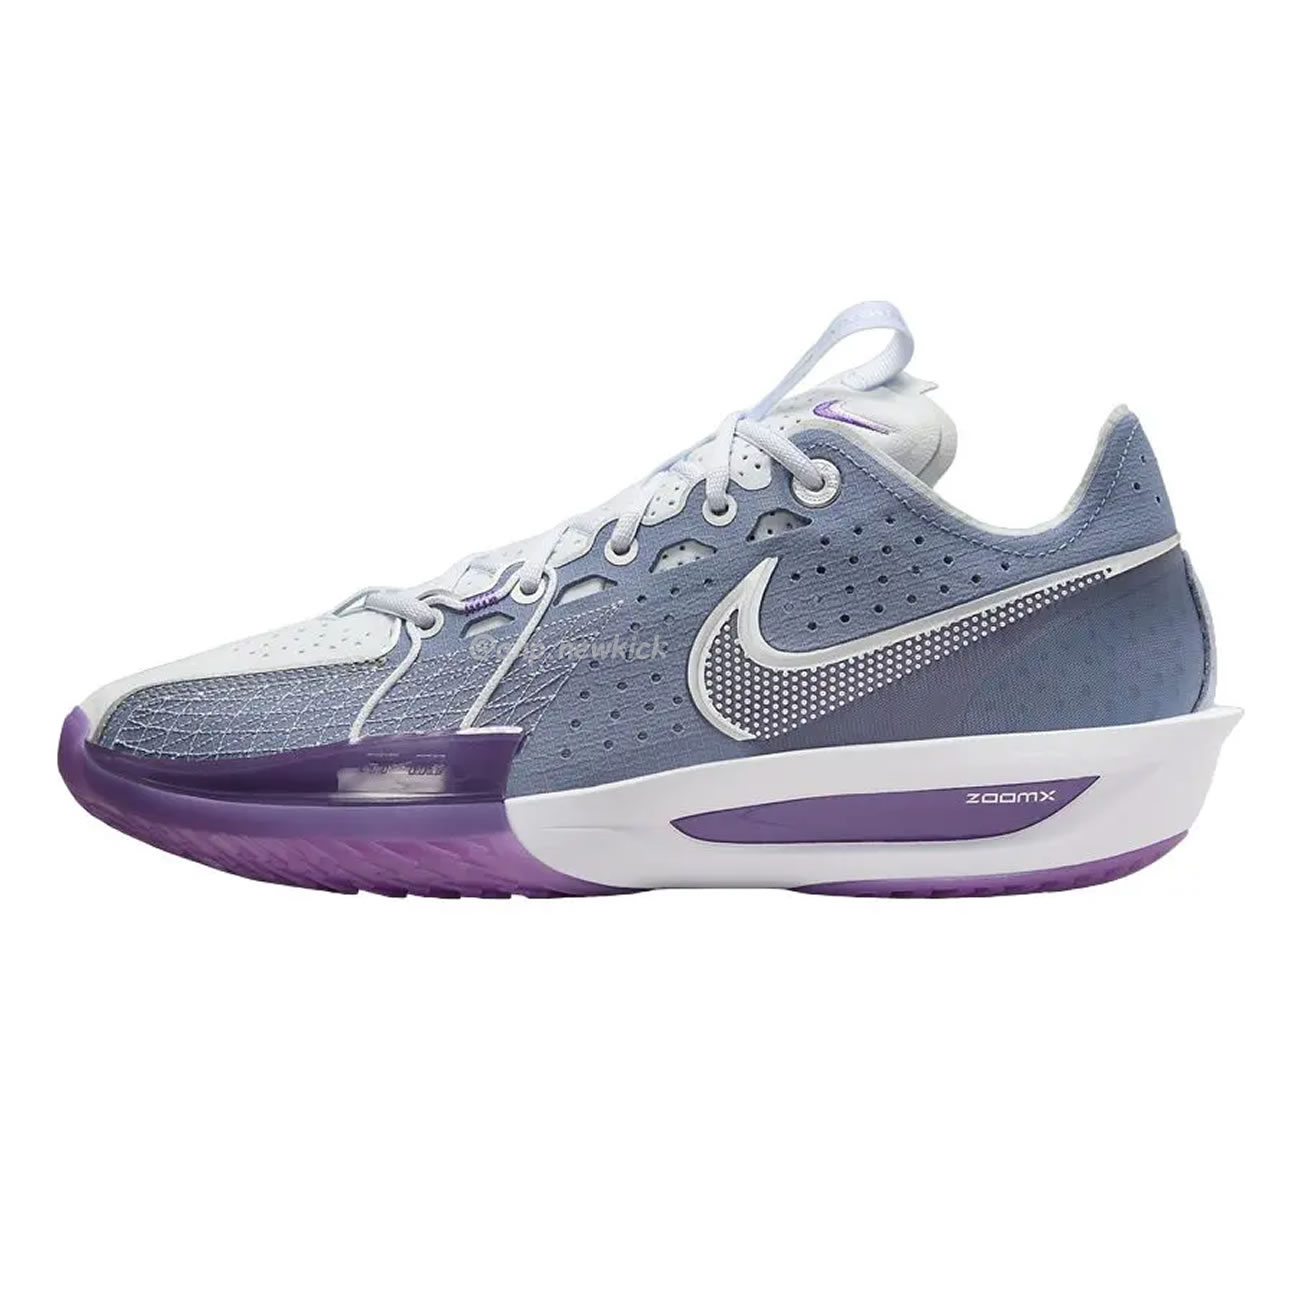 Nike Zoom Gt Cut 3 Be True To Her School White Picante Red Vapor Green University Think Pink (5) - newkick.org